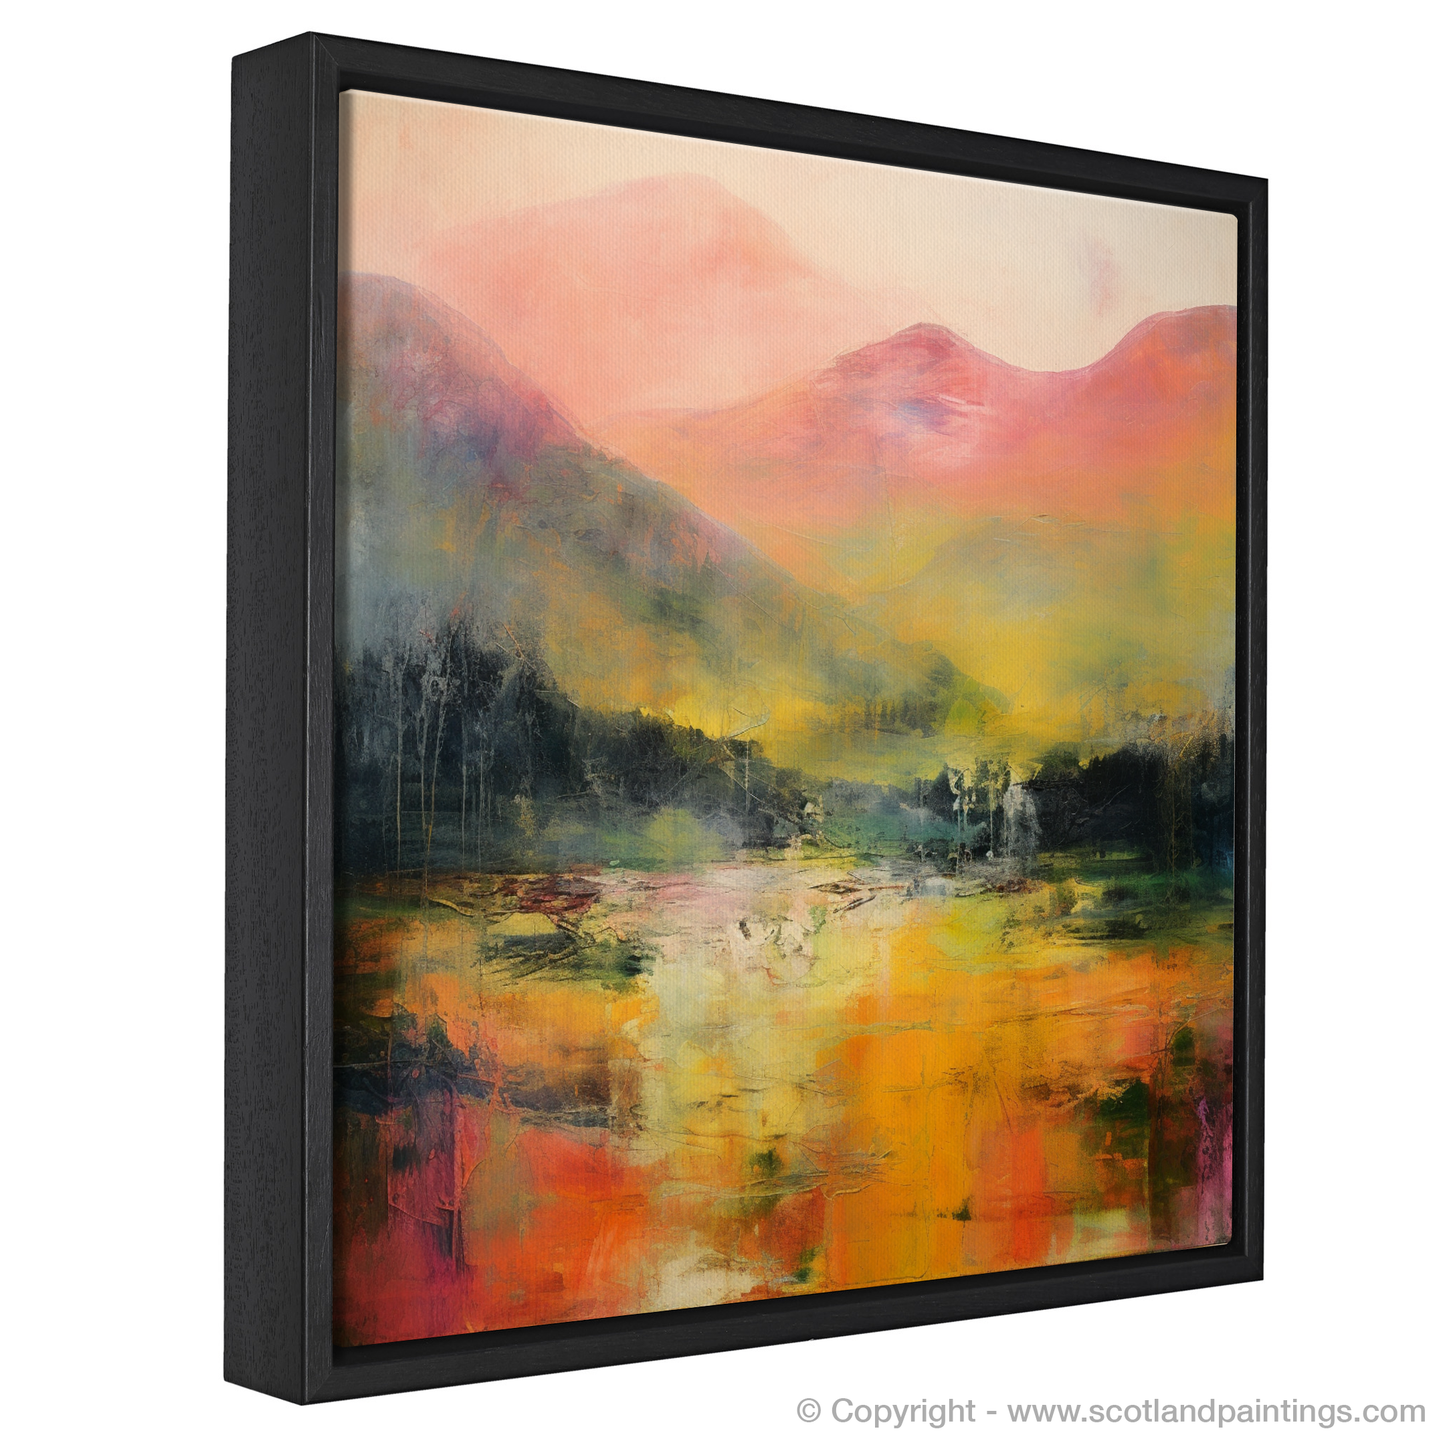 Painting and Art Print of Glen Orchy, Argyll and Bute entitled "Abstract Echoes of Glen Orchy".